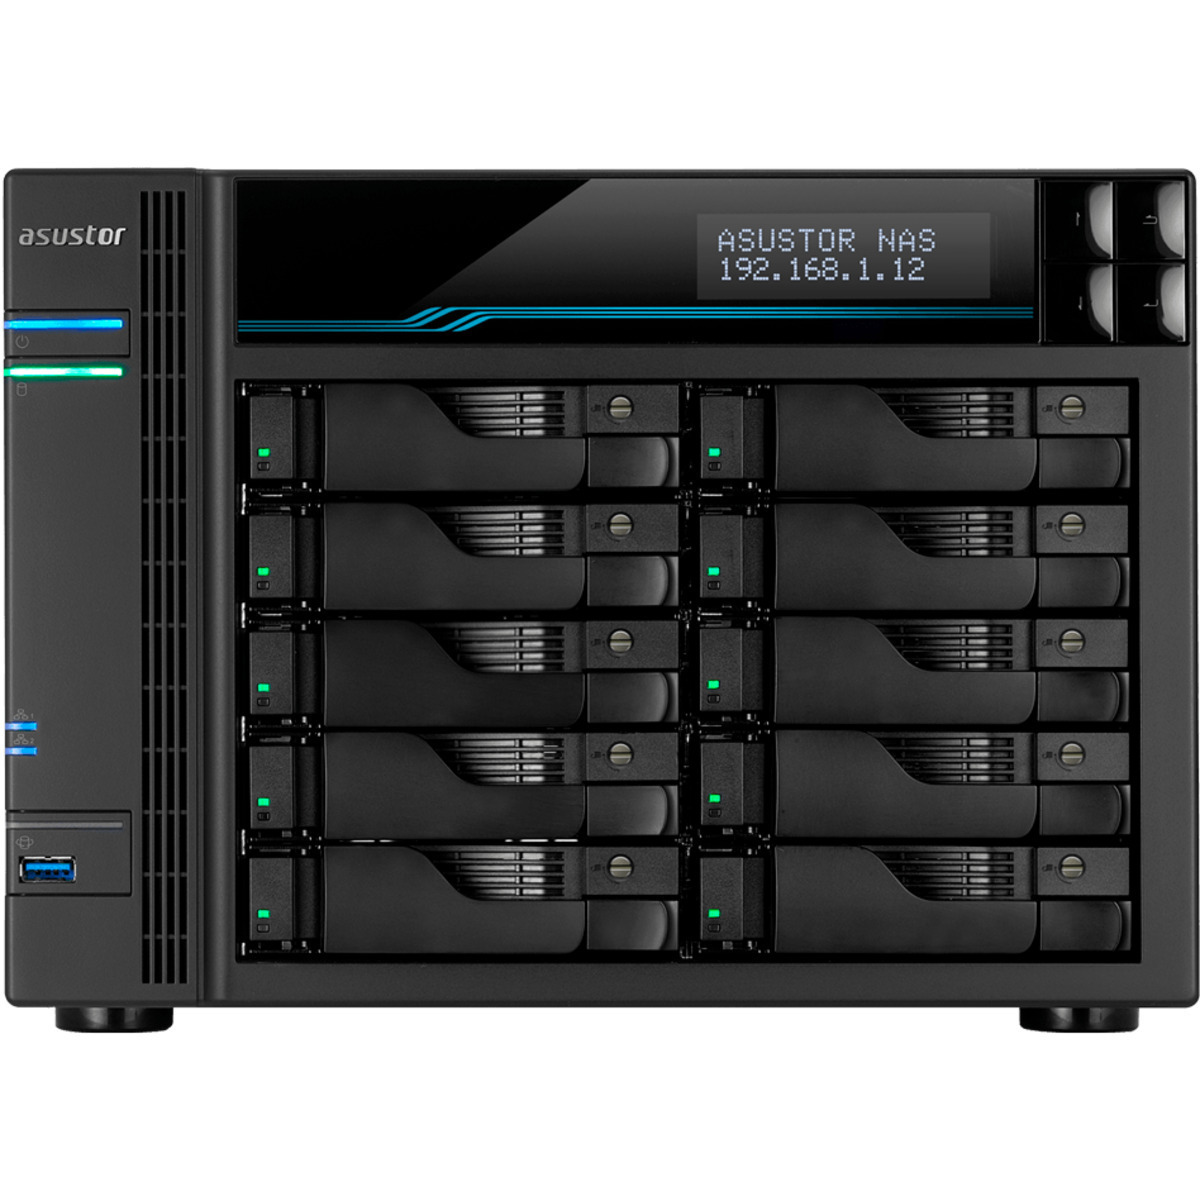 ASUSTOR AS7110T Lockerstor 10 Pro 64tb 10-Bay Desktop Multimedia / Power User / Business NAS - Network Attached Storage Device 8x8tb Seagate BarraCuda ST8000DM004 3.5 5400rpm SATA 6Gb/s HDD CONSUMER Class Drives Installed - Burn-In Tested AS7110T Lockerstor 10 Pro